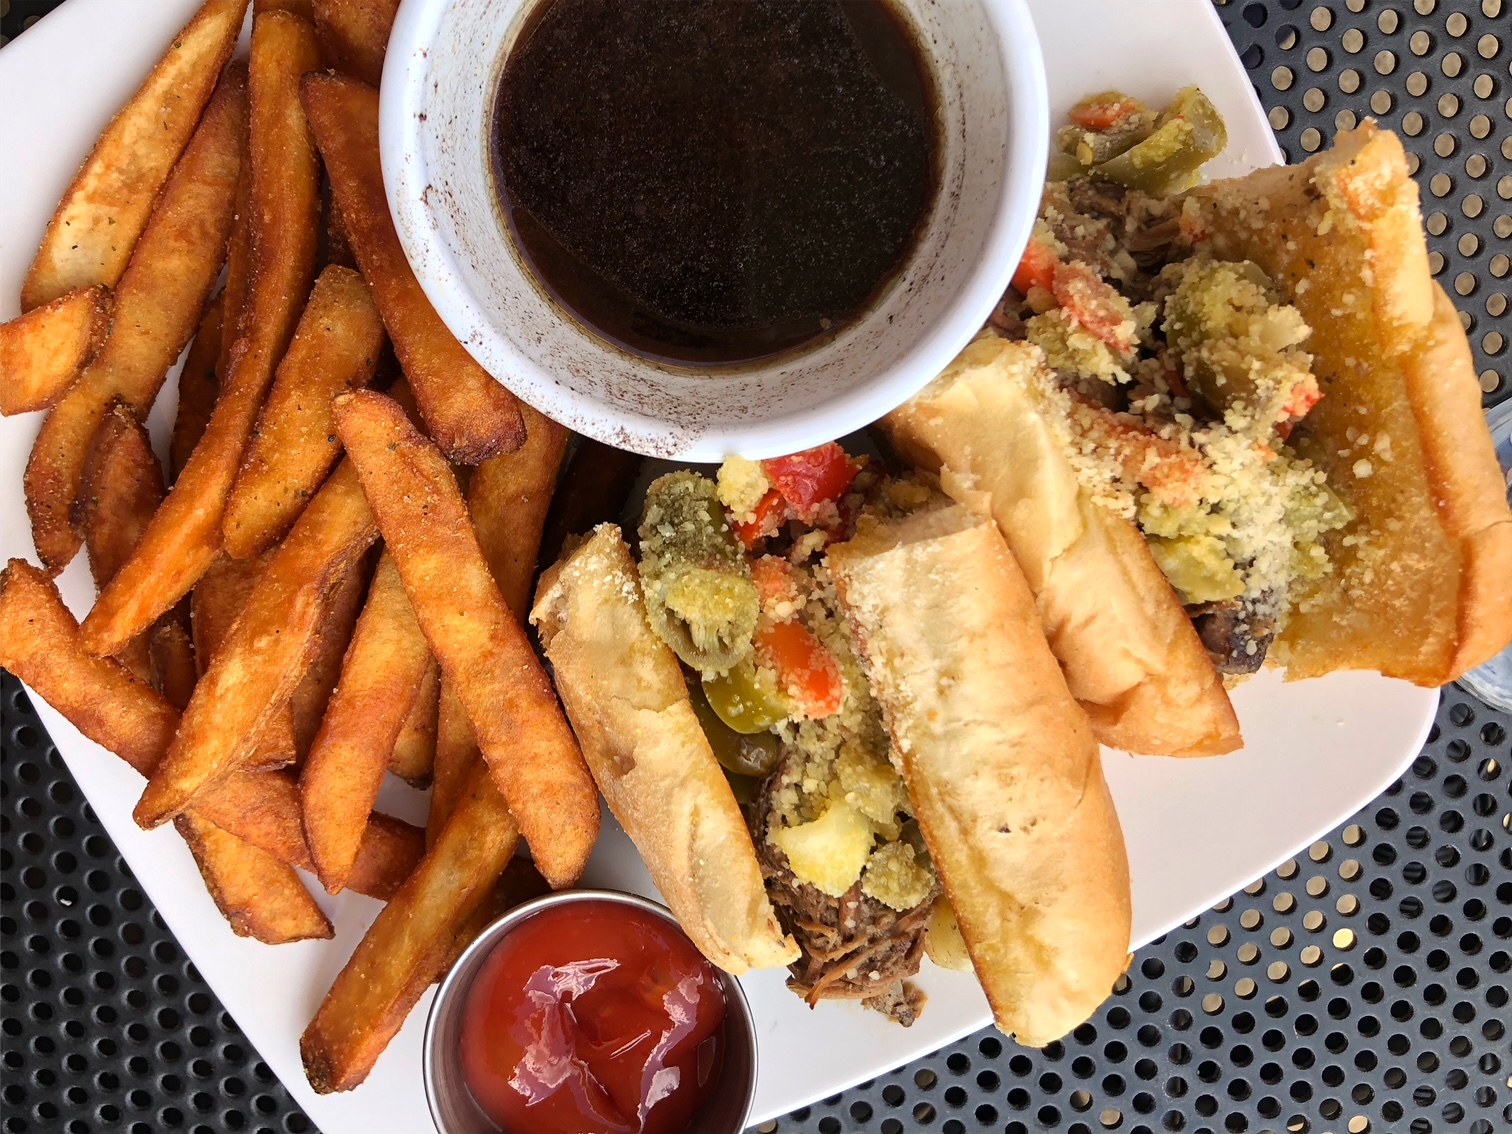 On Baxter's American Grille's outdoor patio in Champaign, there is a plate with a sliced Italian beef with pepeprs and Parmesan plus a side of seasoned fries anda cup of ketchup and cup of au jus. Photo by Alyssa Buckley.